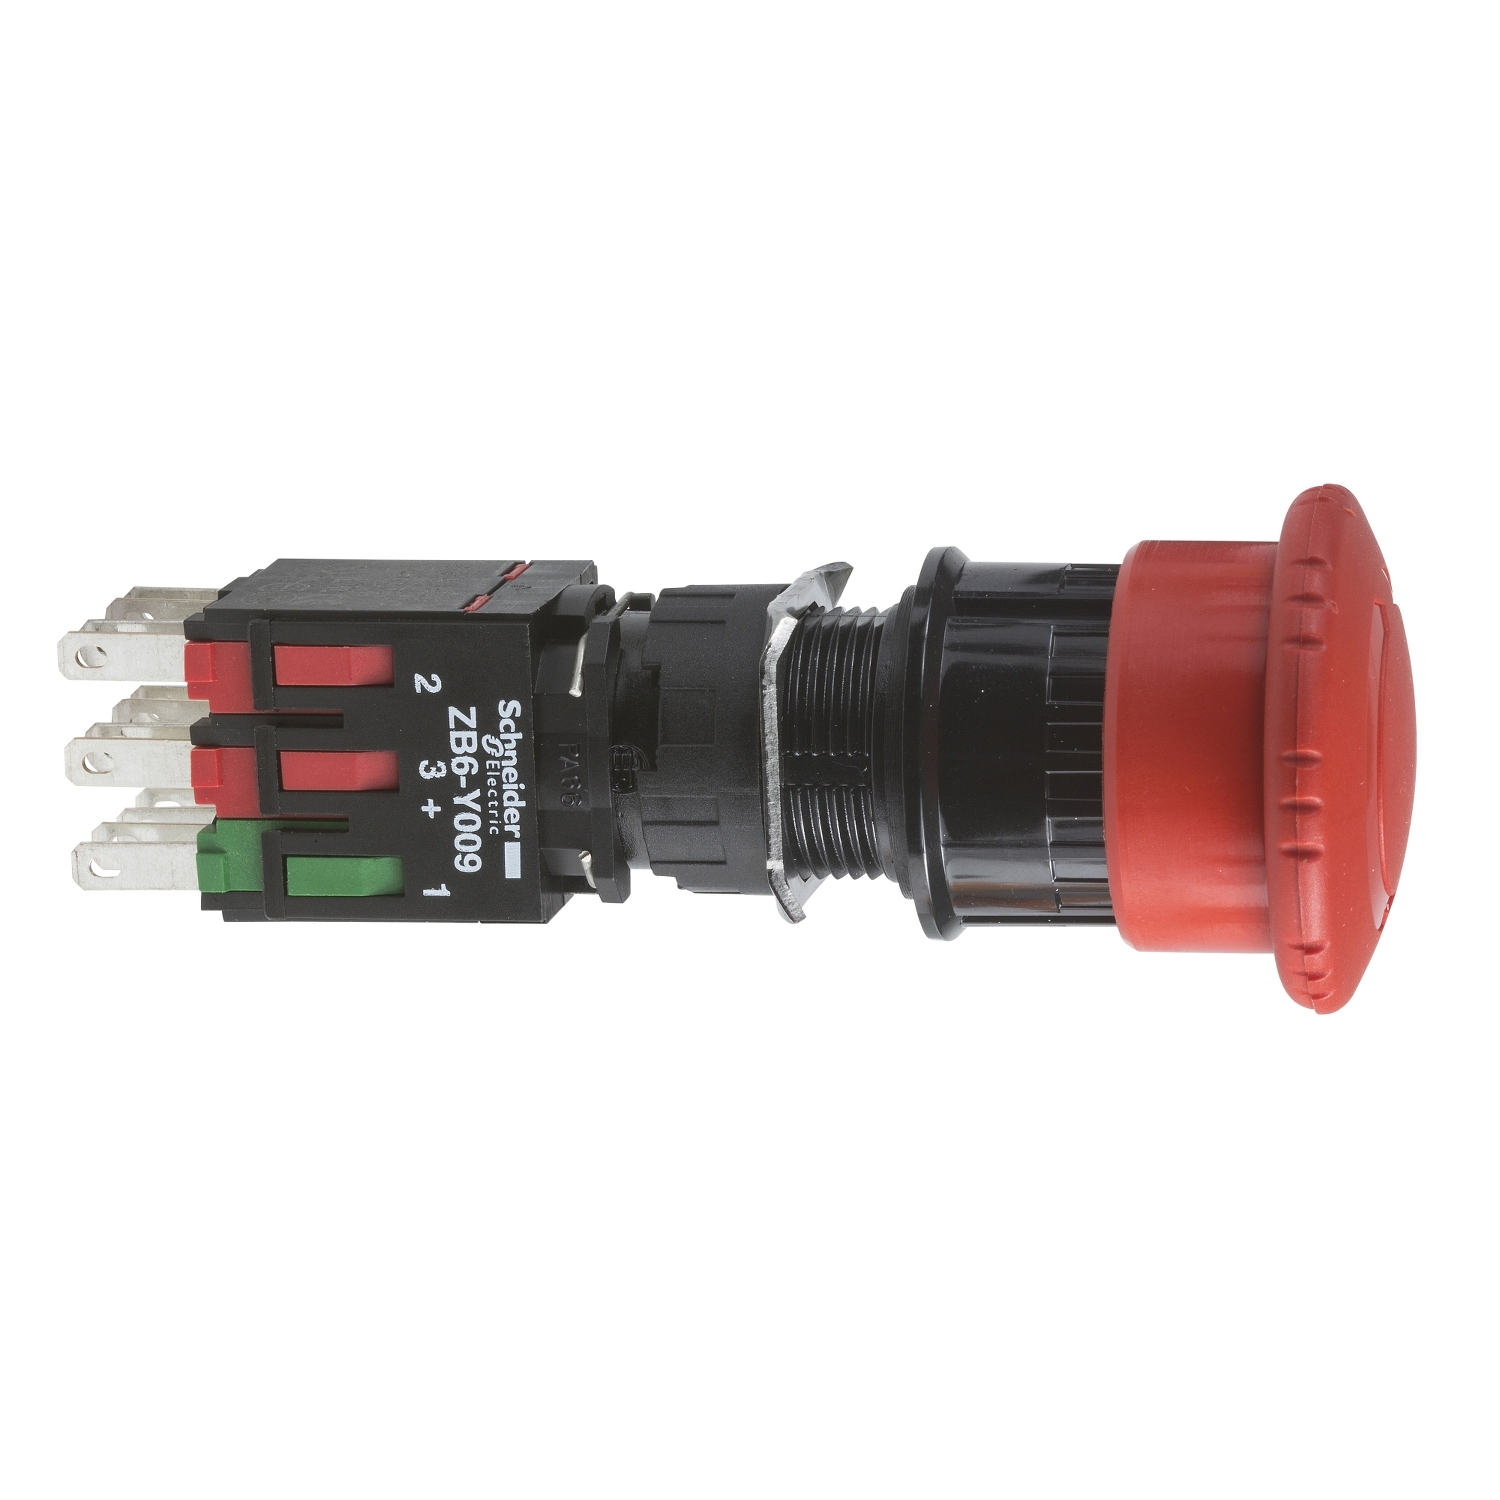 Complete emergency stop push button, Harmony XB6, 16mm, red pushbutton30mm, trigger/latching Turn to release, 1NO + 2NC